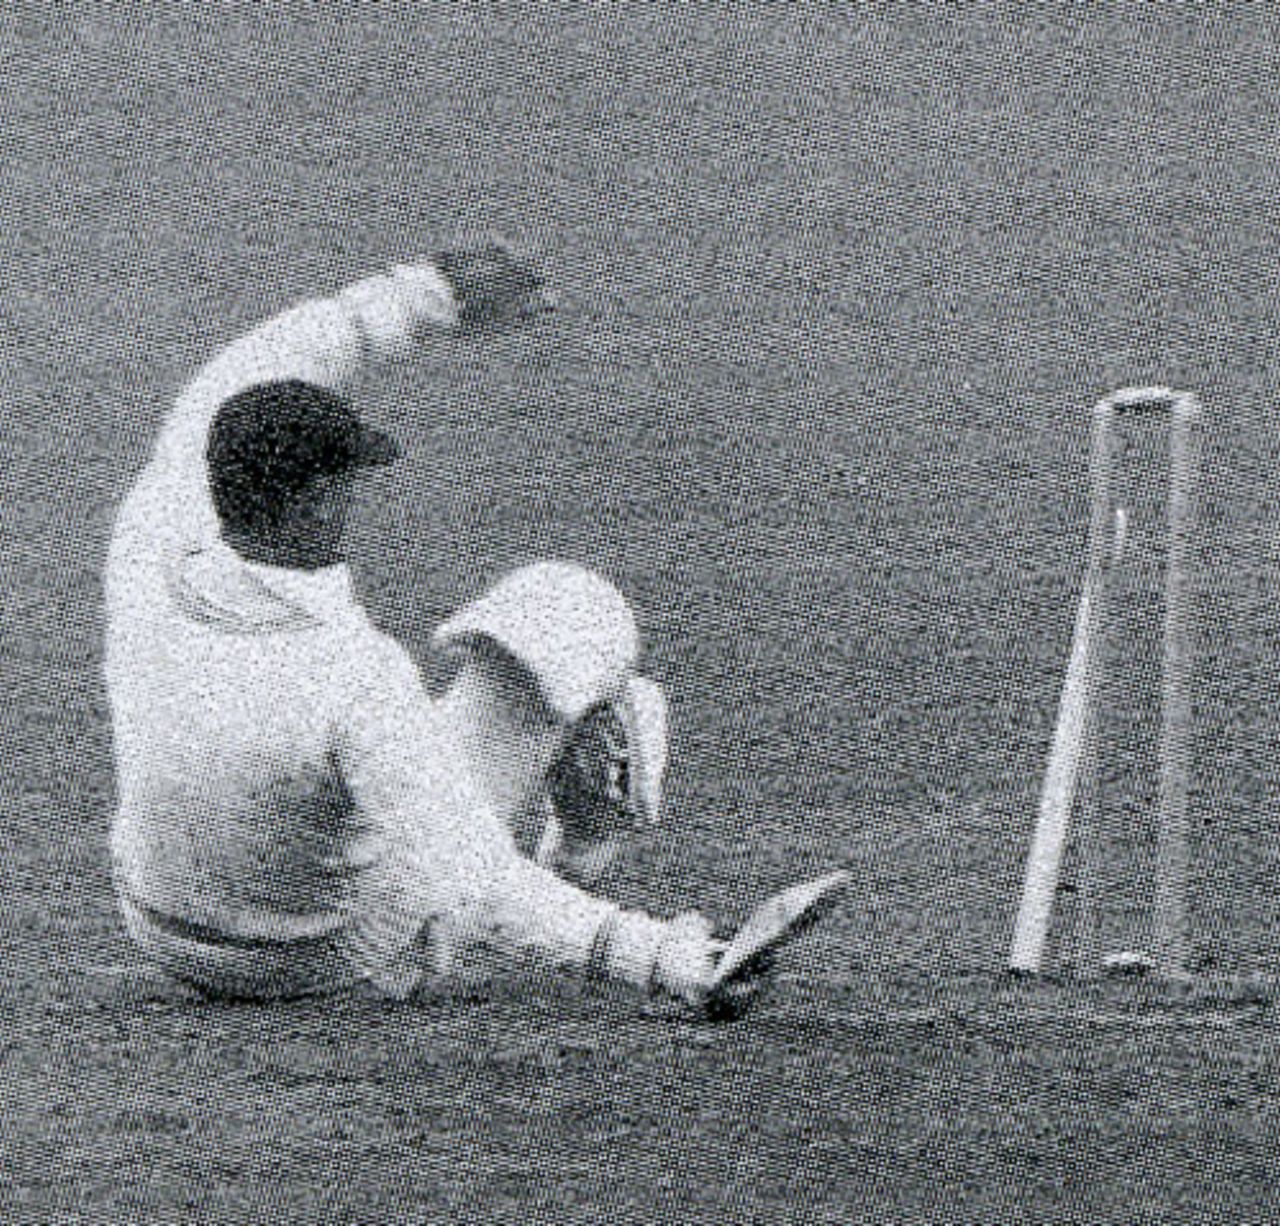 Walter Hadlee treads on his wicket when on 93, England v New Zealand, 2nd Test, Manchester, July 26, 1937